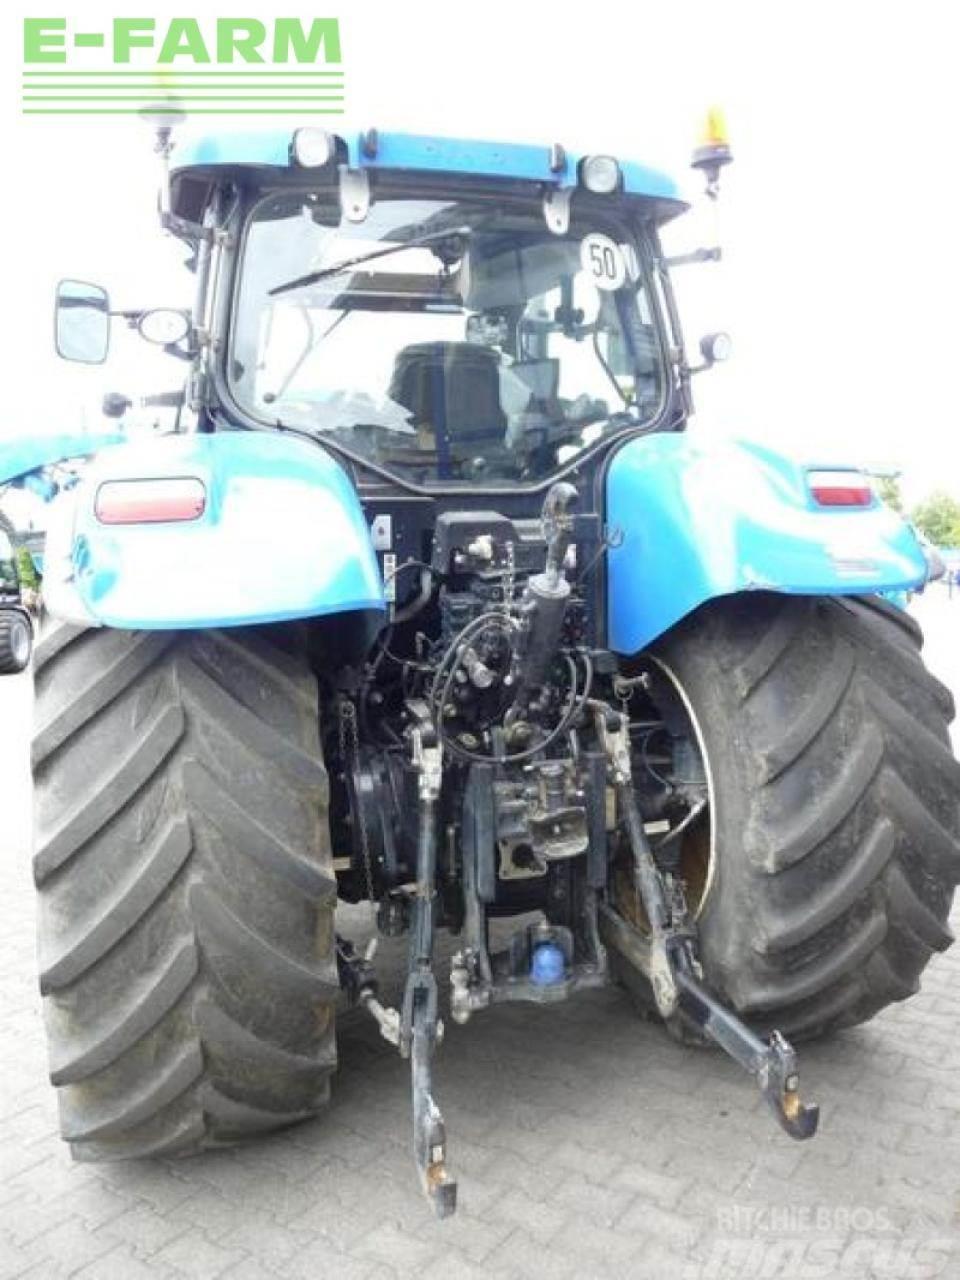 New Holland t7.210 ac Tractores